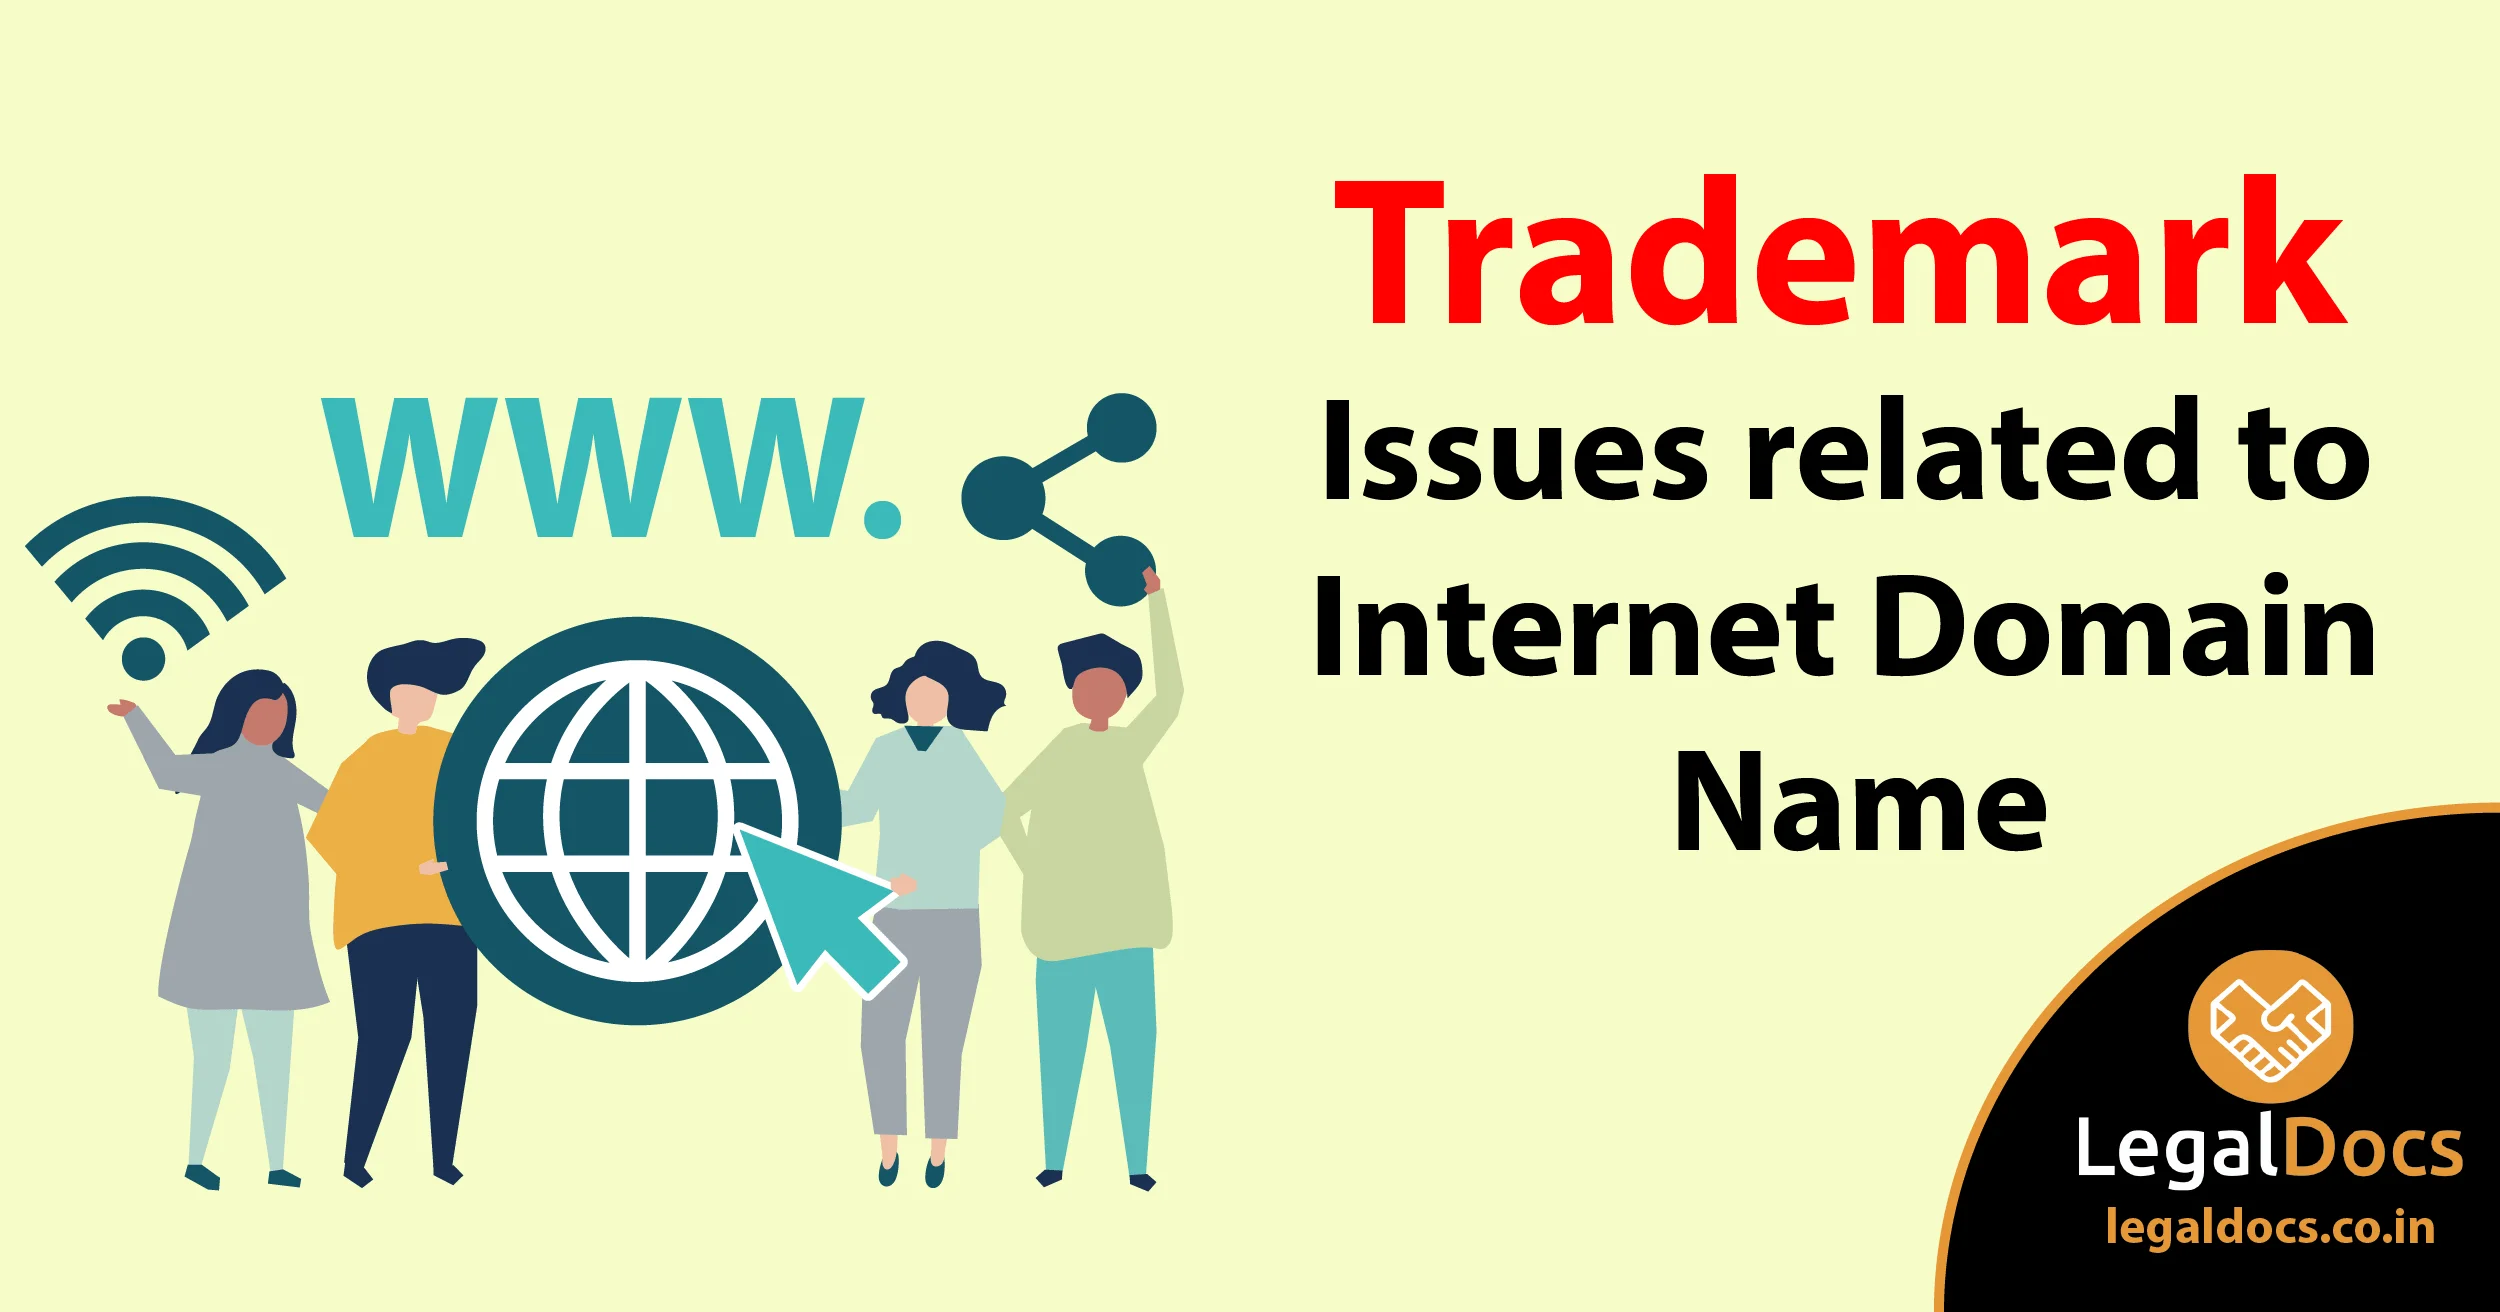 Trademark Issues related to Internet Domain Name - LegalDocs